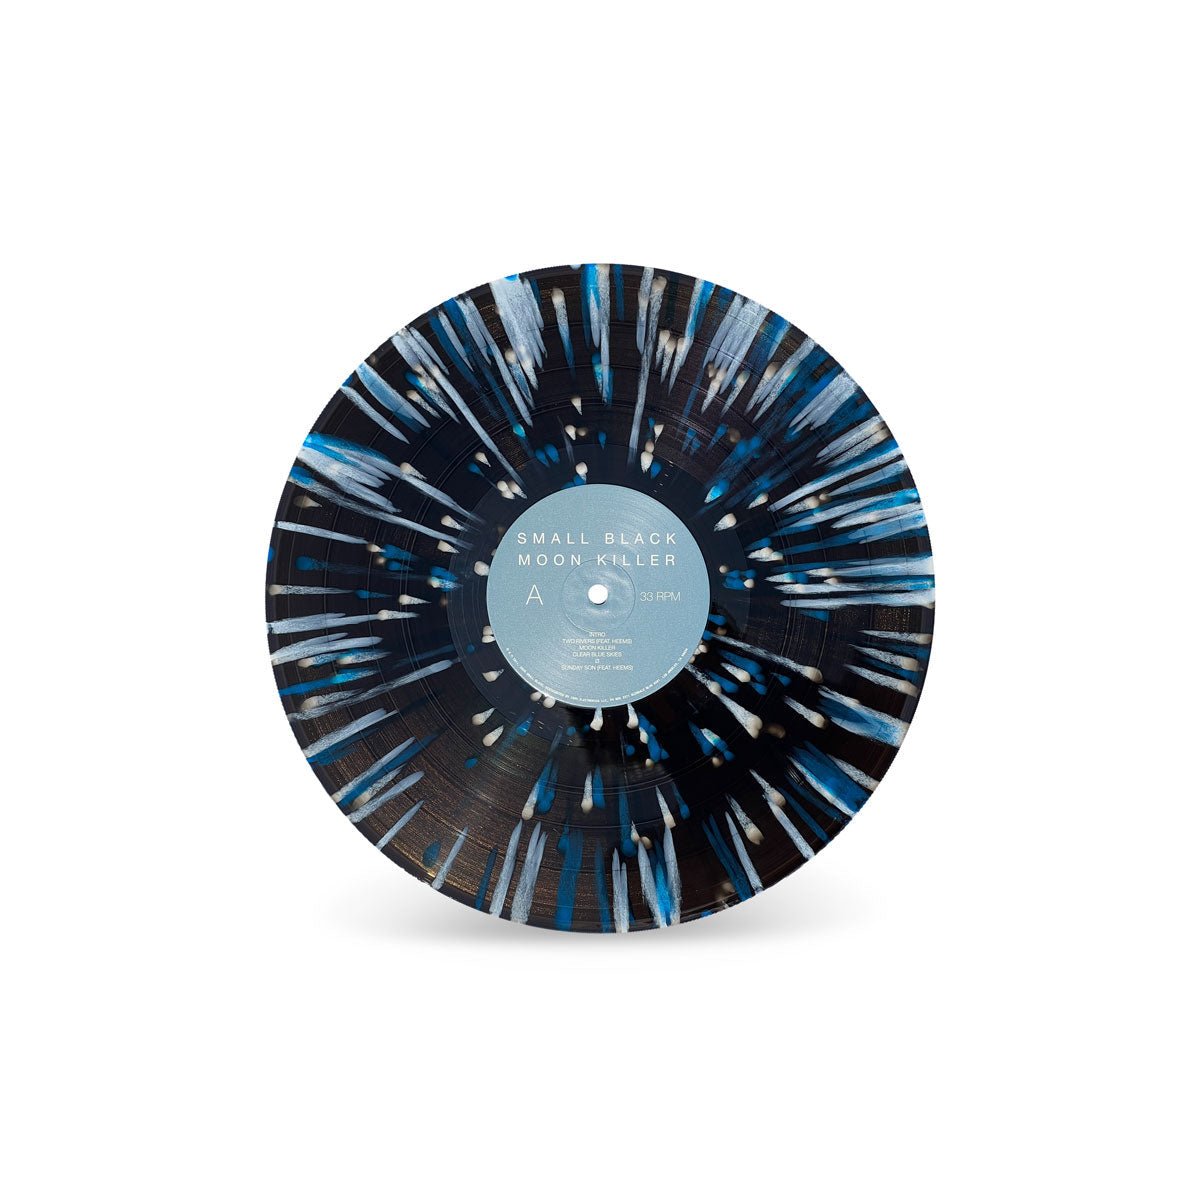 Small Black - Moon Killer LP (Deluxe Edition) Black Ice Splatter Vinyl - 100% Electronica Official Store (Photo 2)